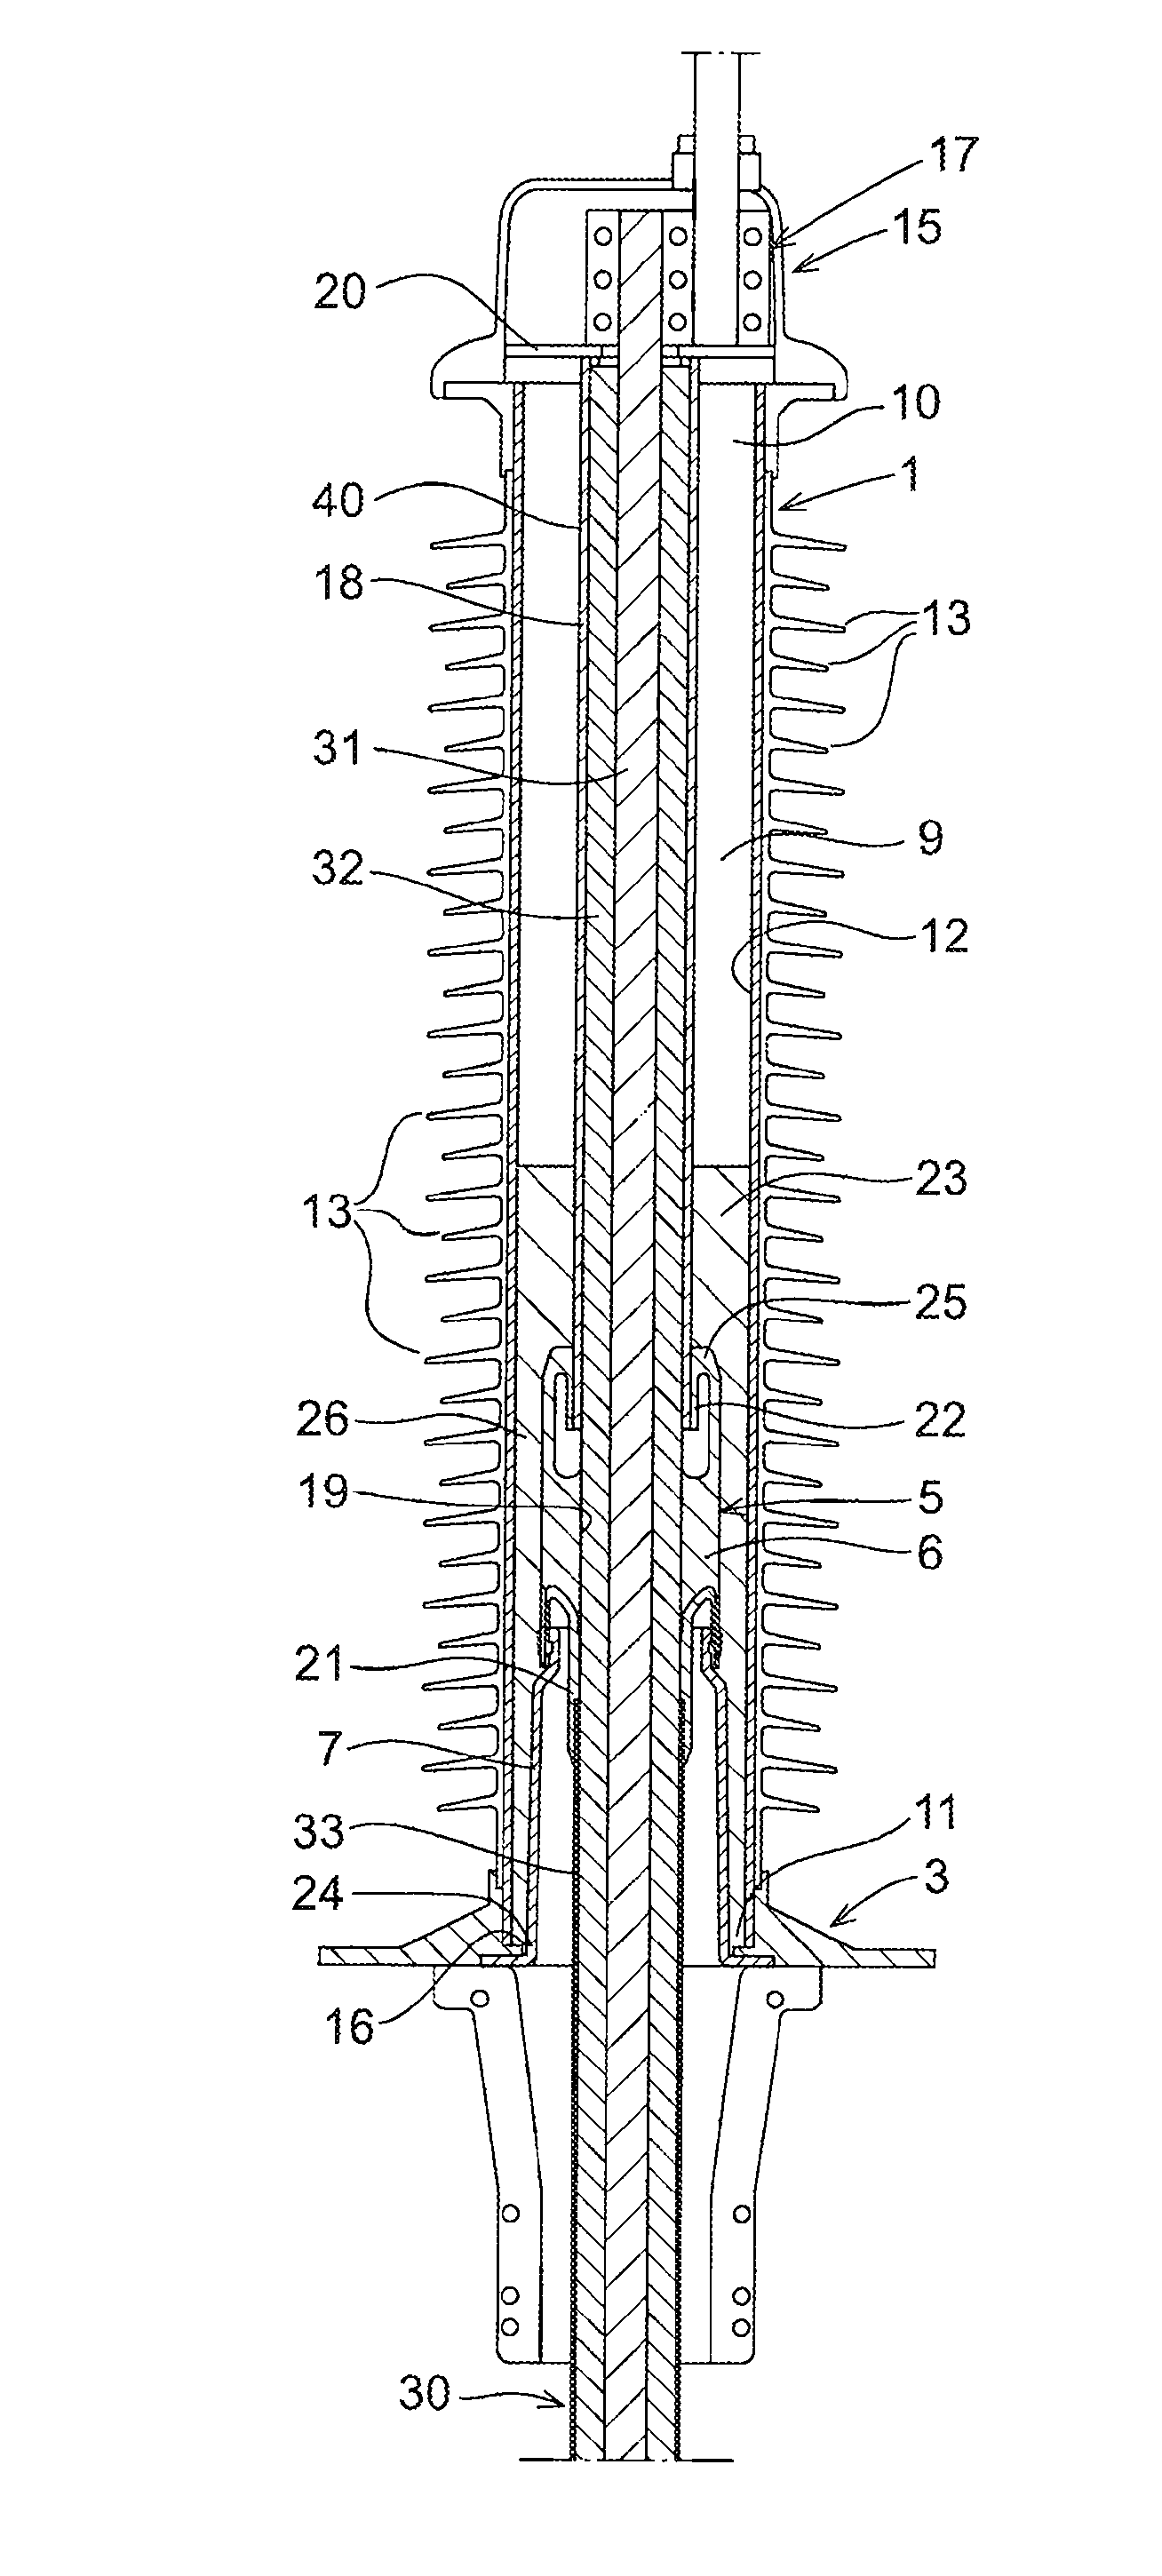 Cable termination device, a method for prefabricating a cable termination device and a method for achieving a cable termination